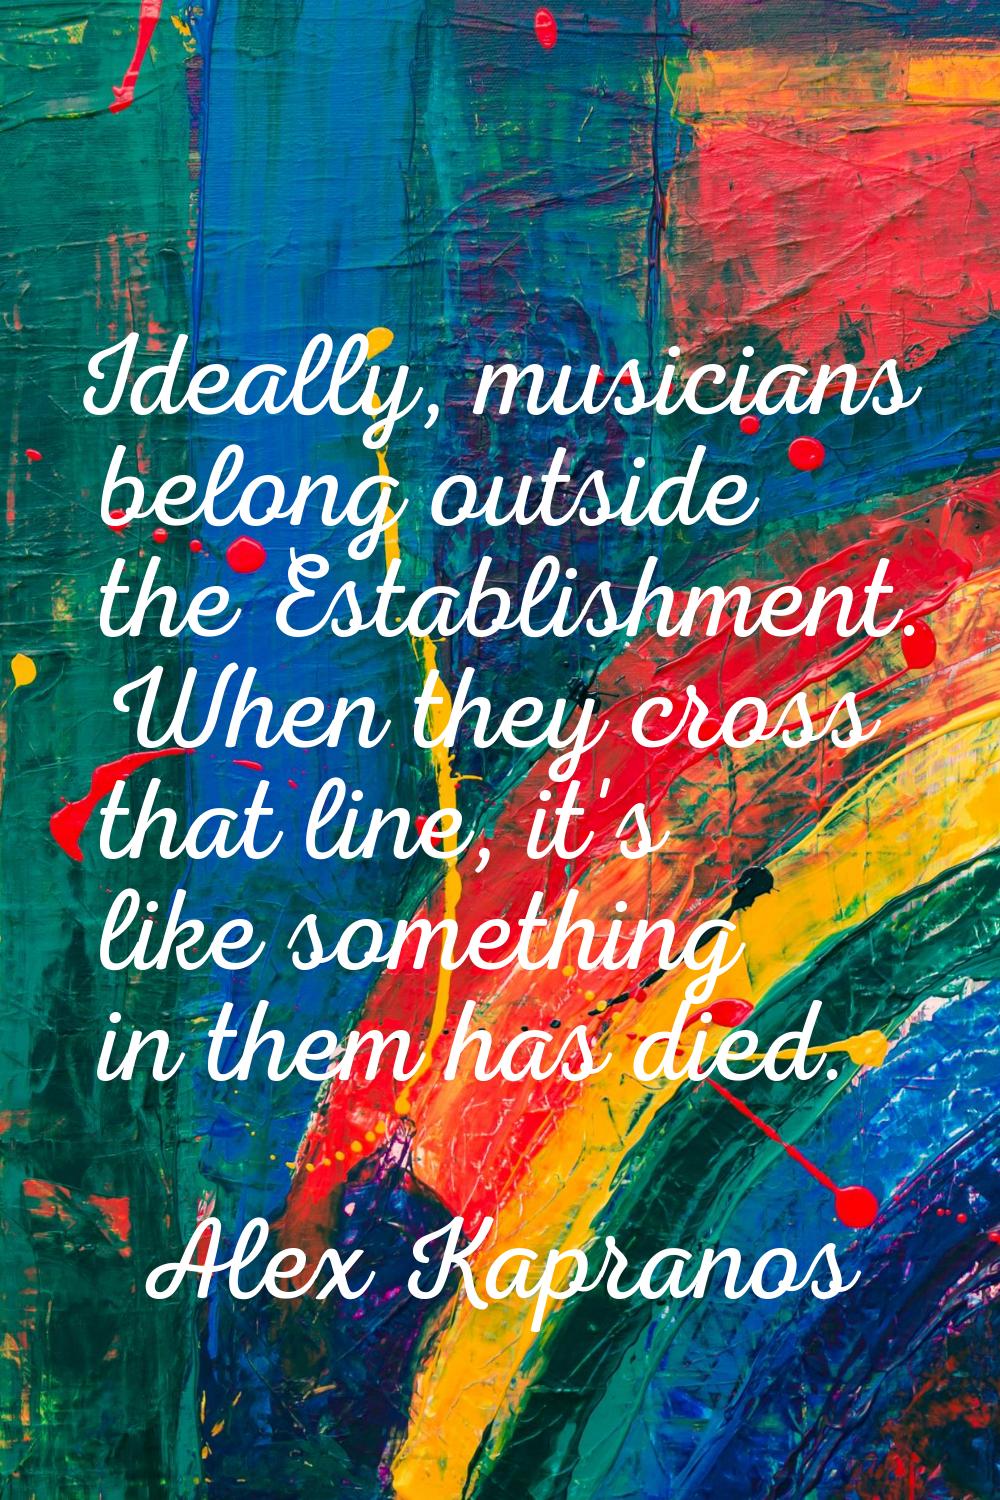 Ideally, musicians belong outside the Establishment. When they cross that line, it's like something